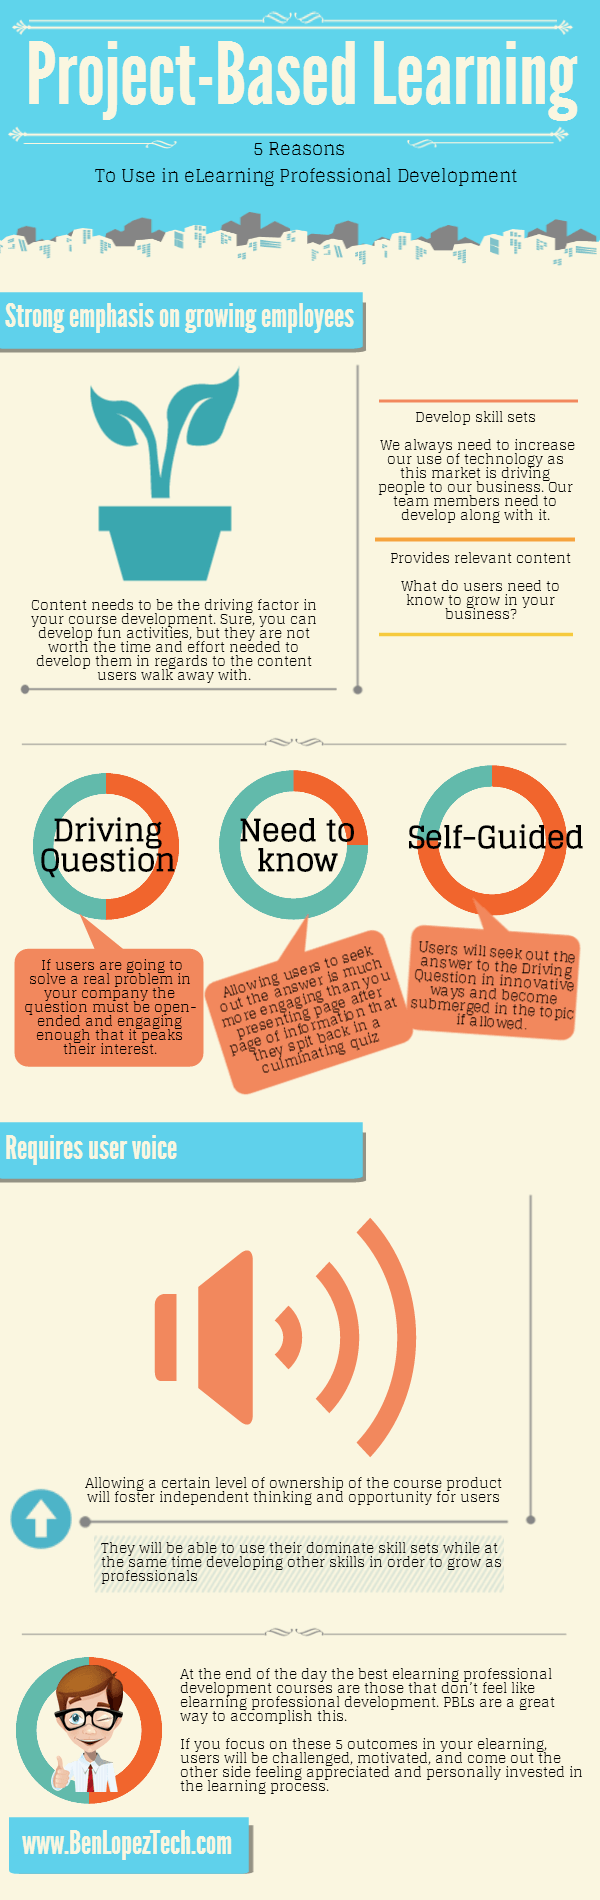 5 Reasons to Use Project-Based eLearning Infographic